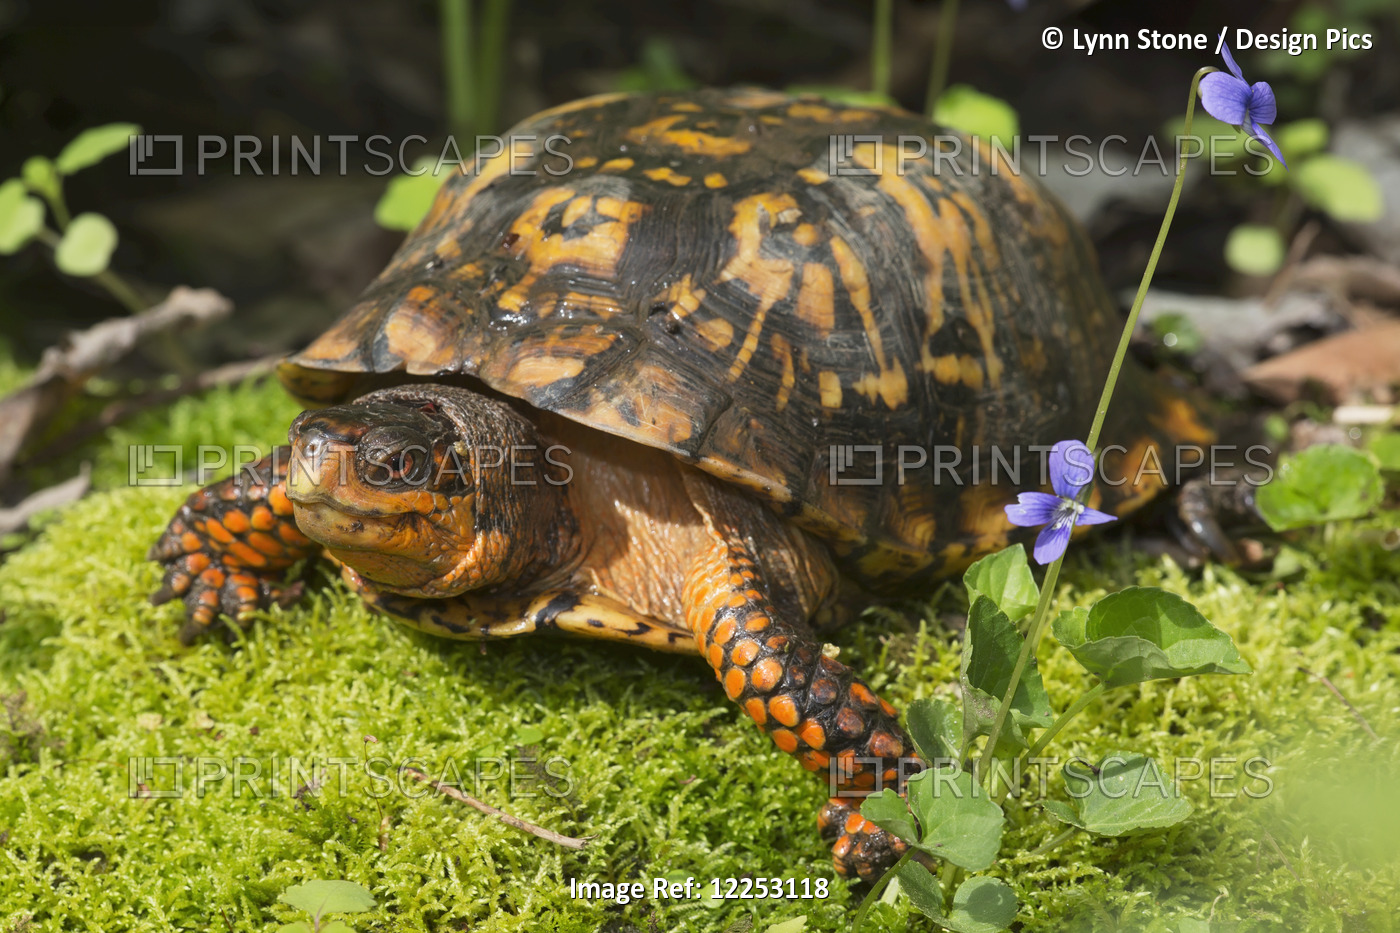 Eastern Box Turtle On Sphagnum Moss Among Blue Violets; Connecticut, USA